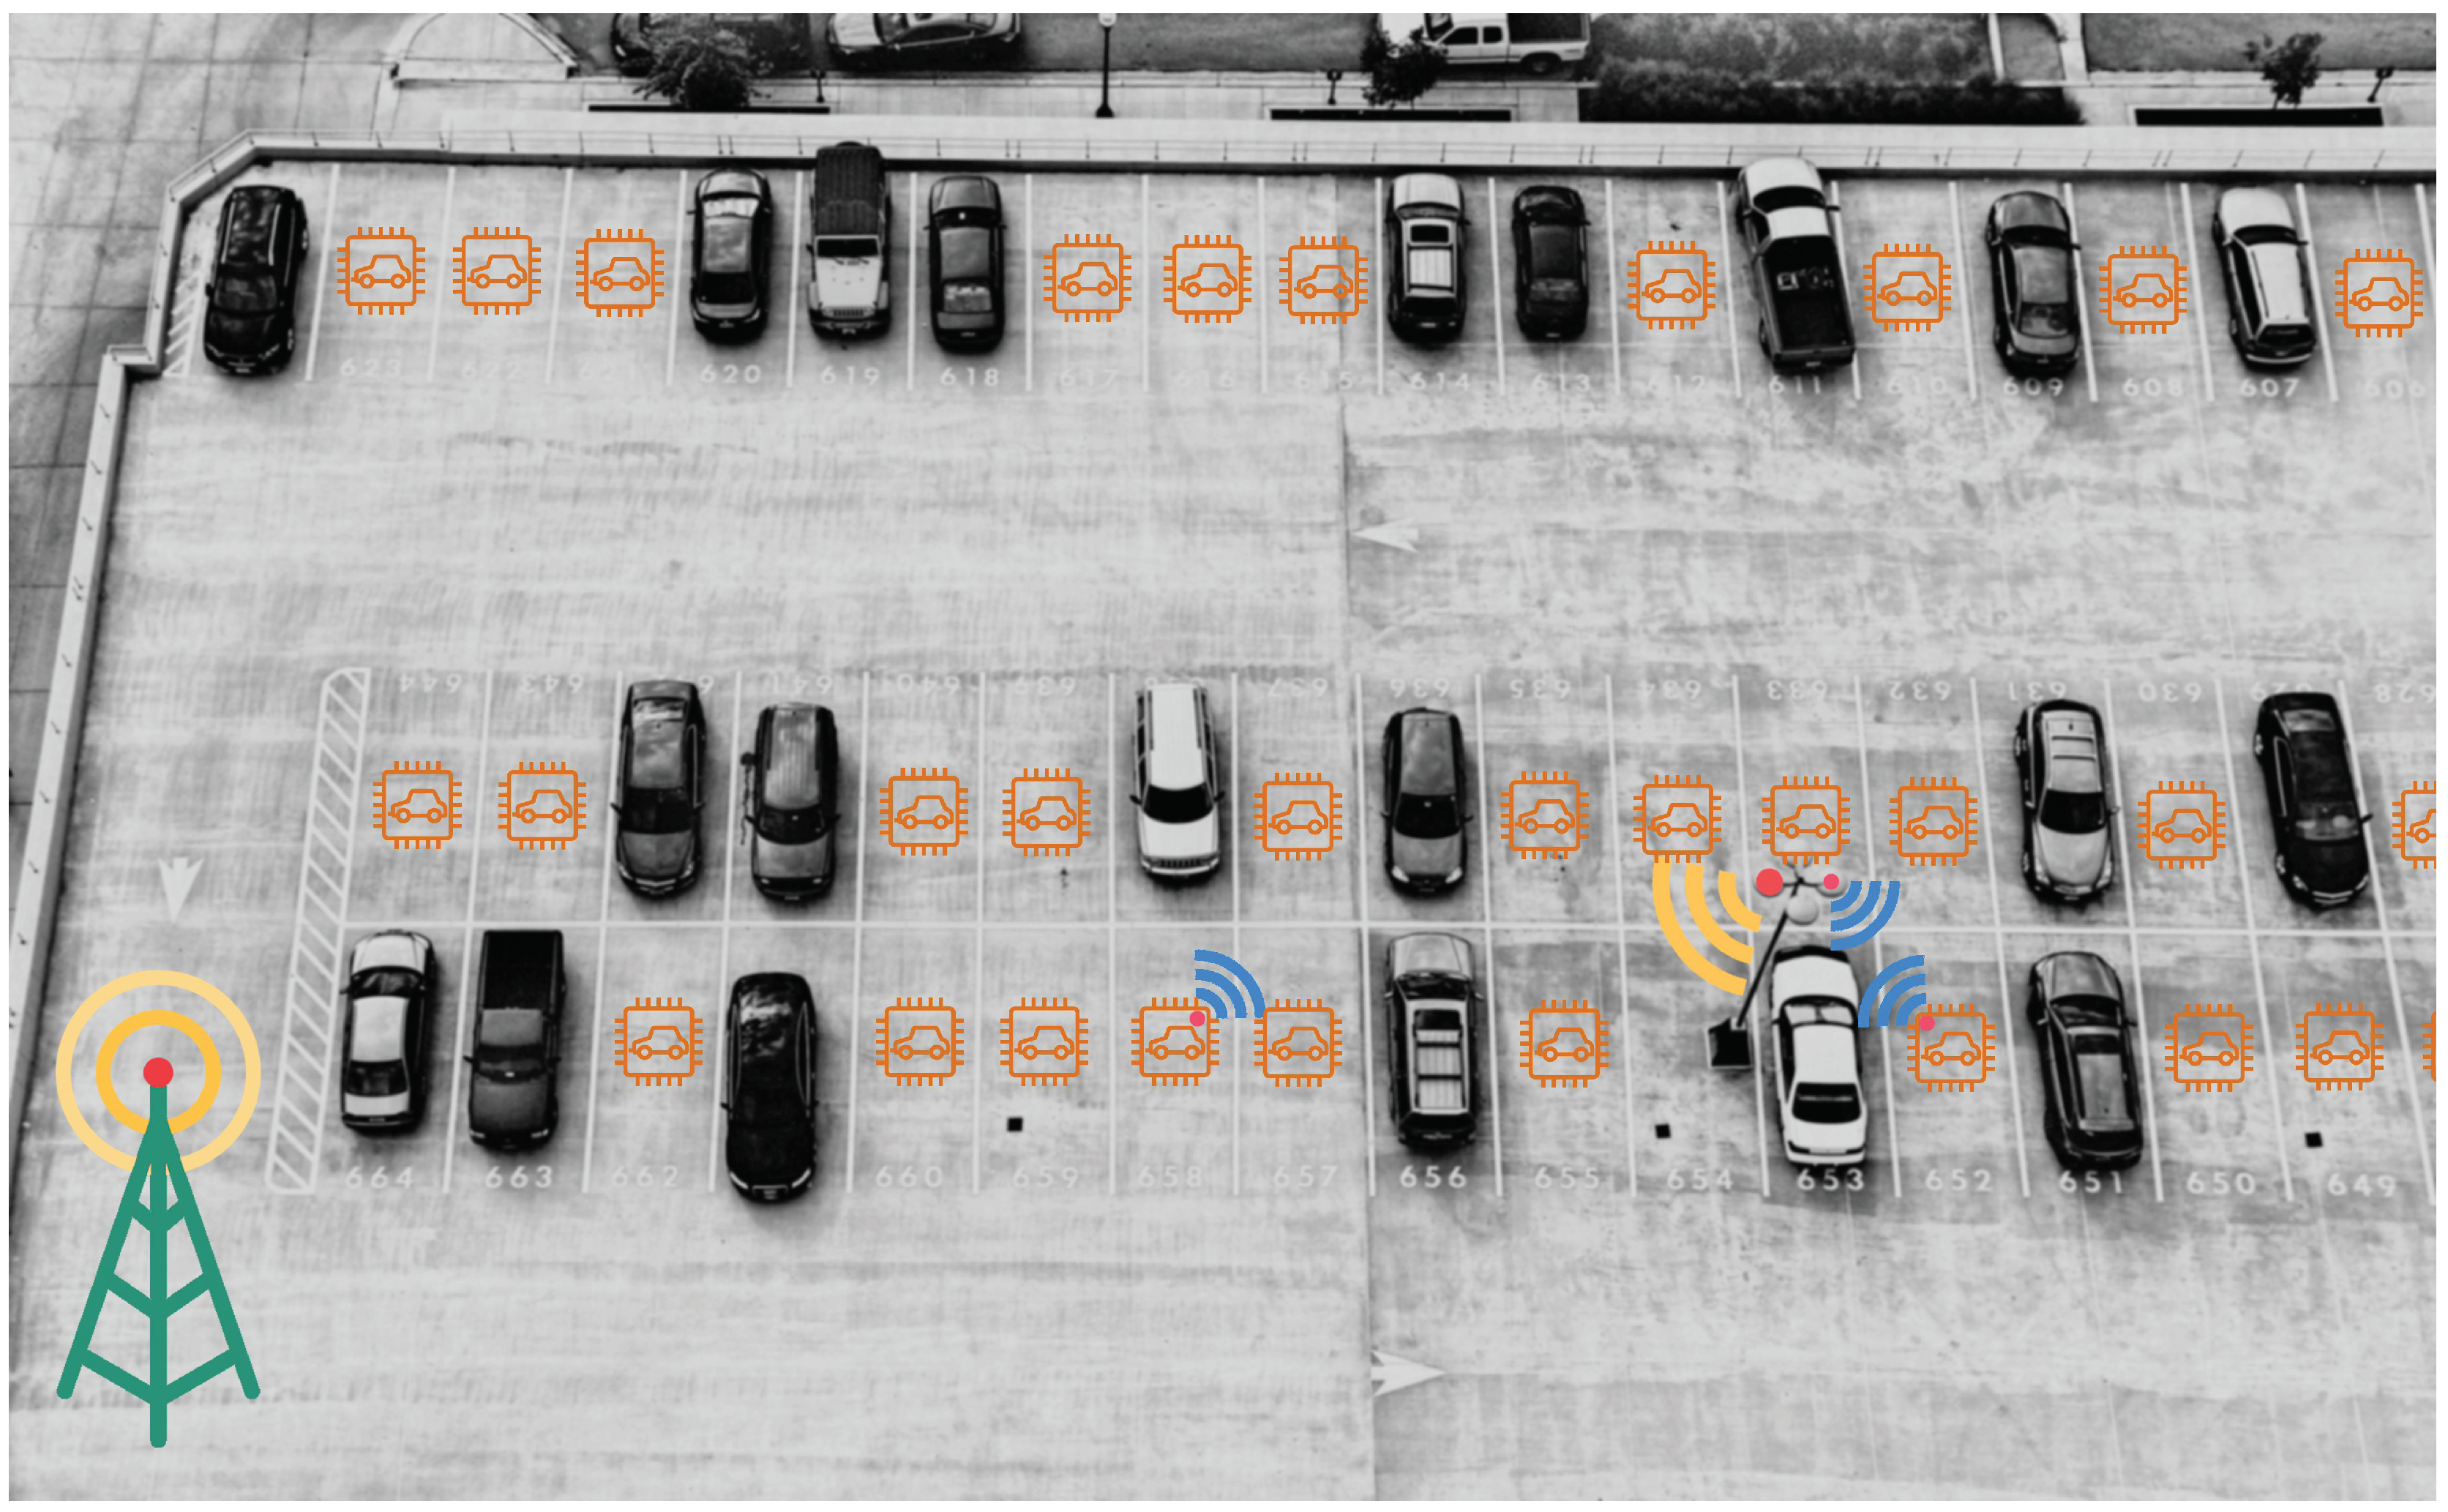 Sensors | Free Full-Text | Smart Parking System with Dynamic Pricing,  Edge-Cloud Computing and LoRa